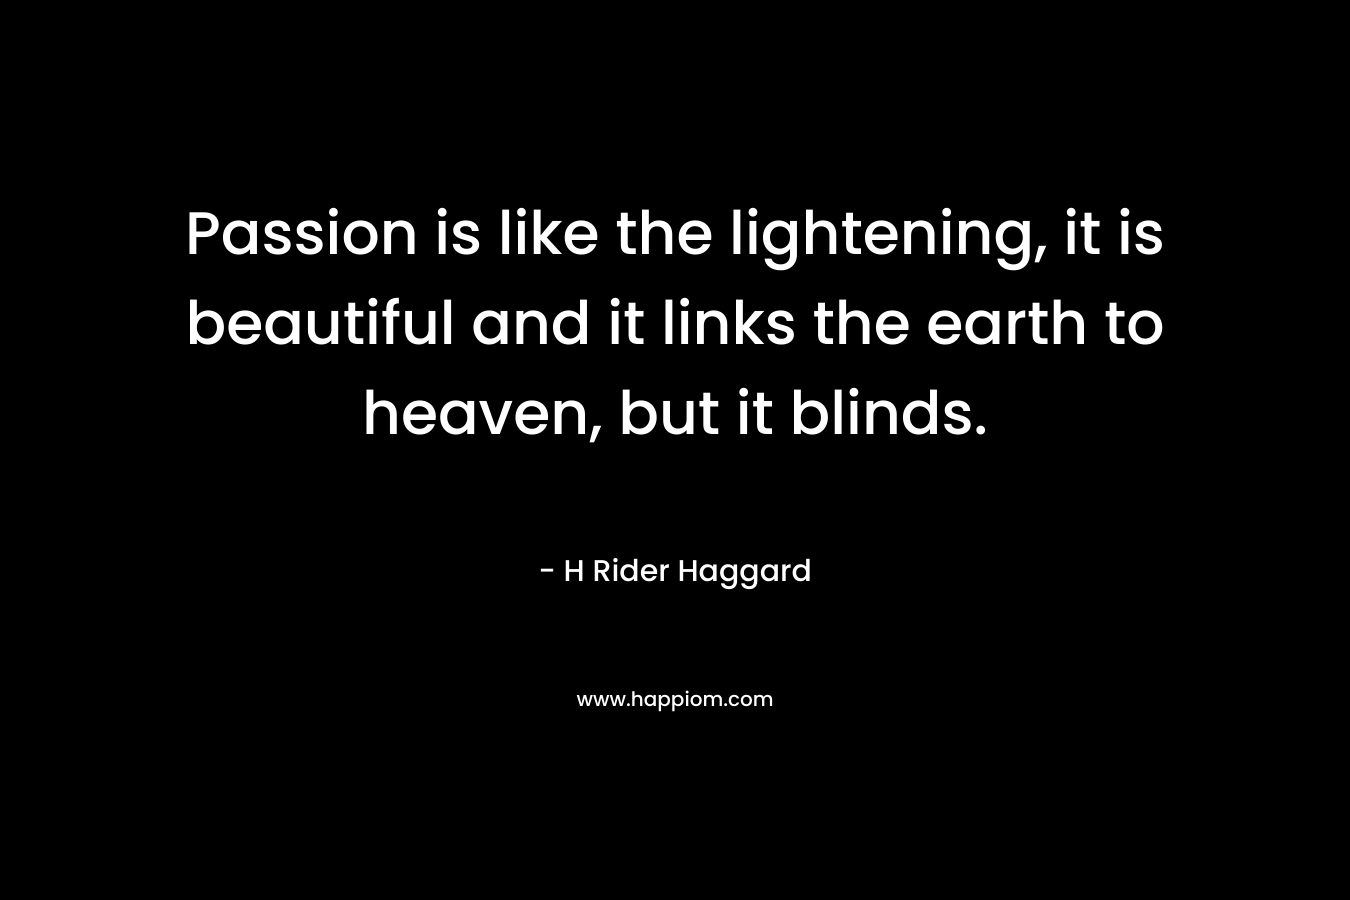 Passion is like the lightening, it is beautiful and it links the earth to heaven, but it blinds.